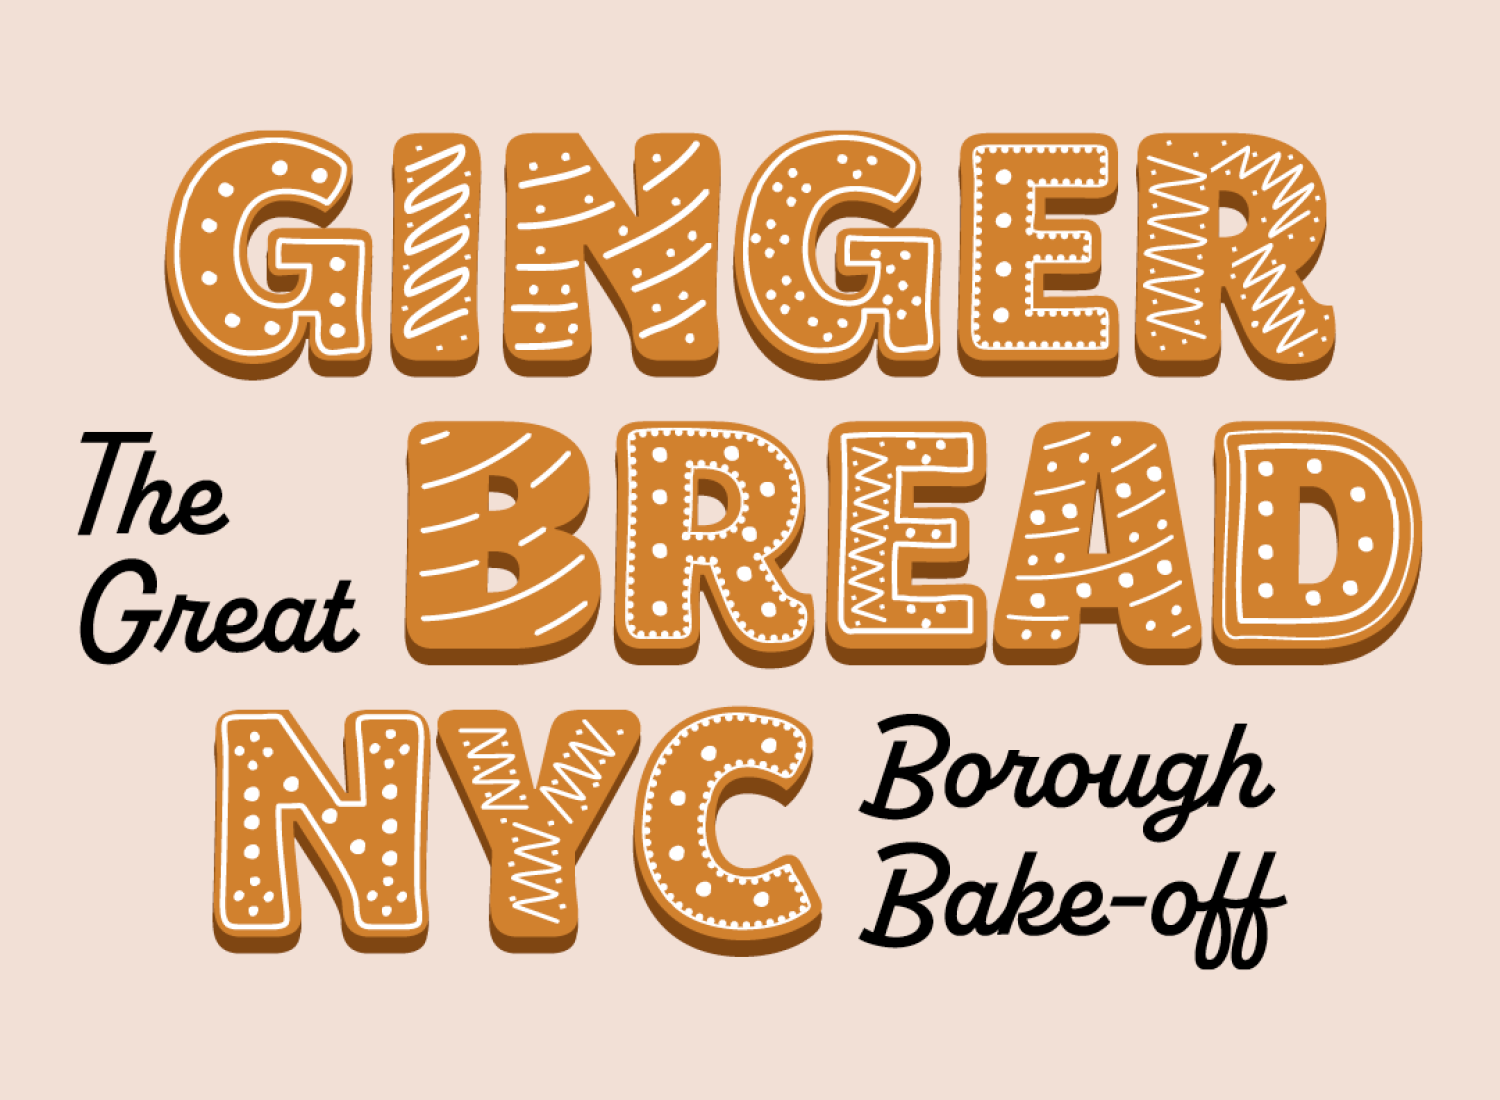 Graphic with the text "Gingerbread NYC" shaped out of iced cookies and "The Great Borough Bake-off: in black script.